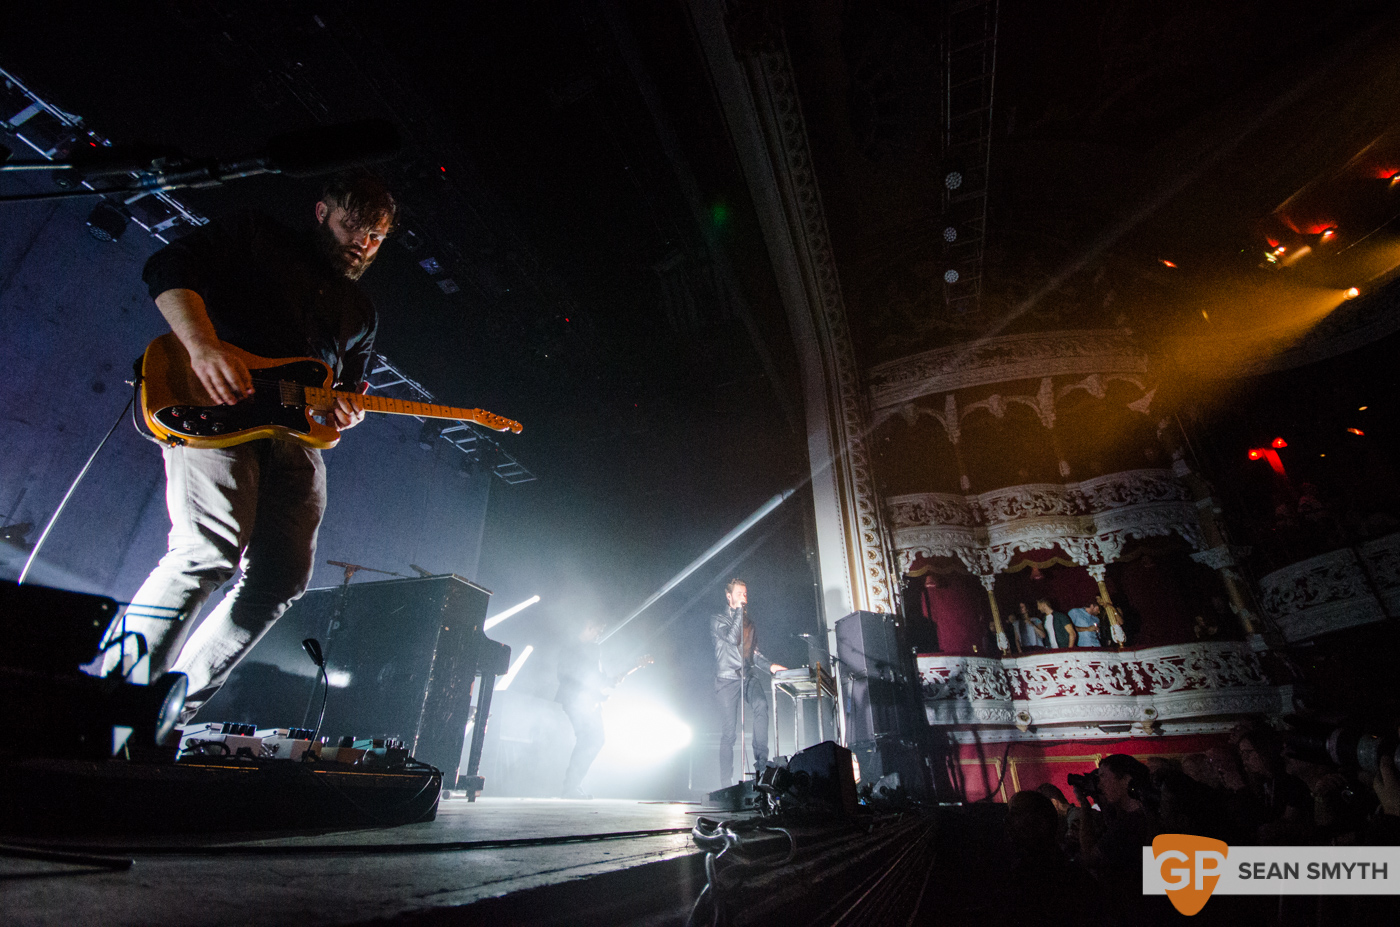 editors-at-the-olympia-theatre-by-sean-smyth-10-10-15-27-of-28_21467587874_o